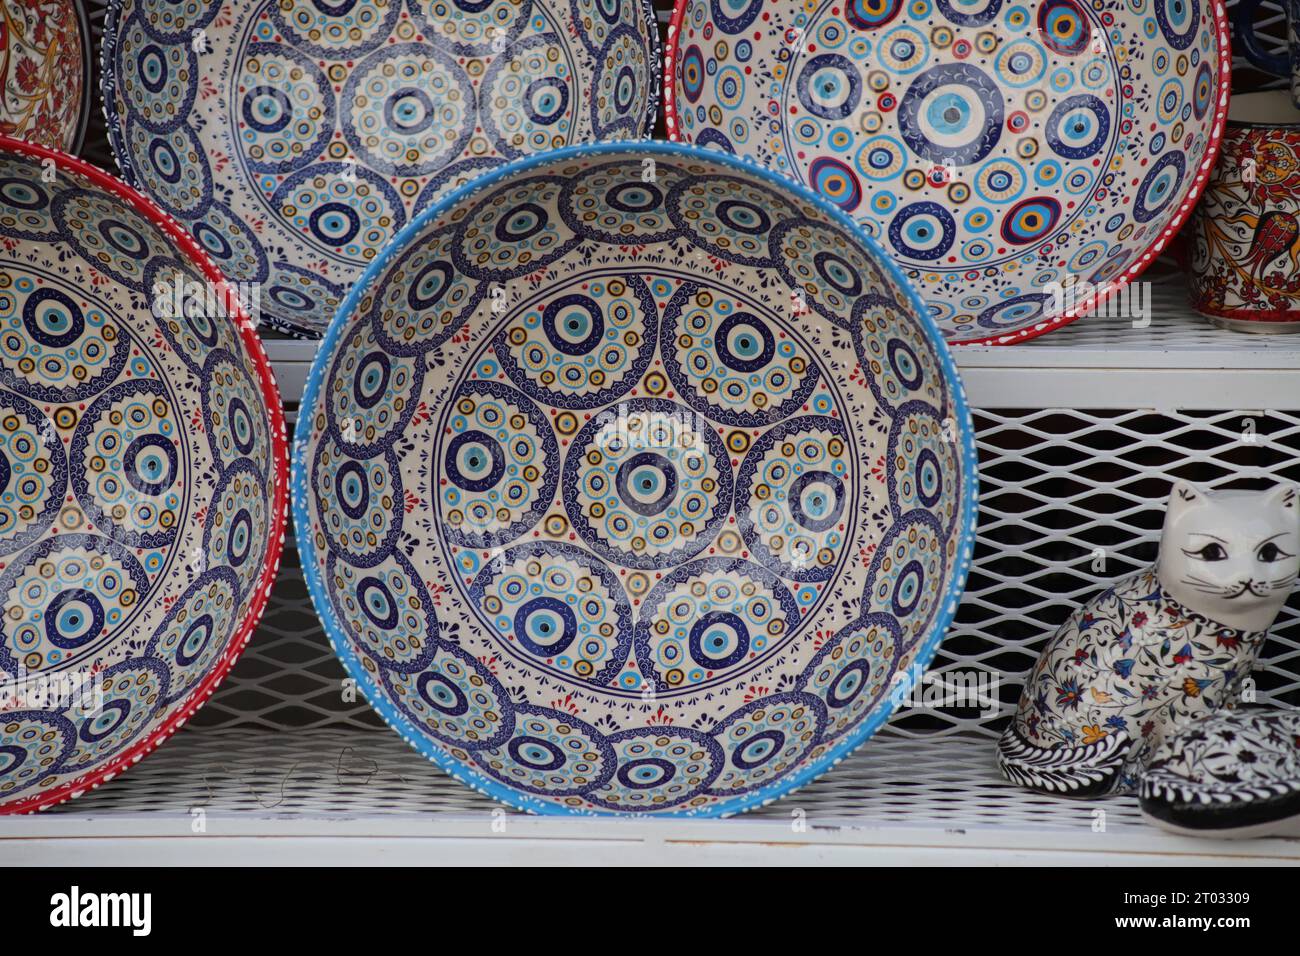 Rows of beautiful multi coloured decorative Bowls, Various Holders and Cats on White Mesh Shelves with Evil Eye and Floral Designs facing forward. Stock Photo